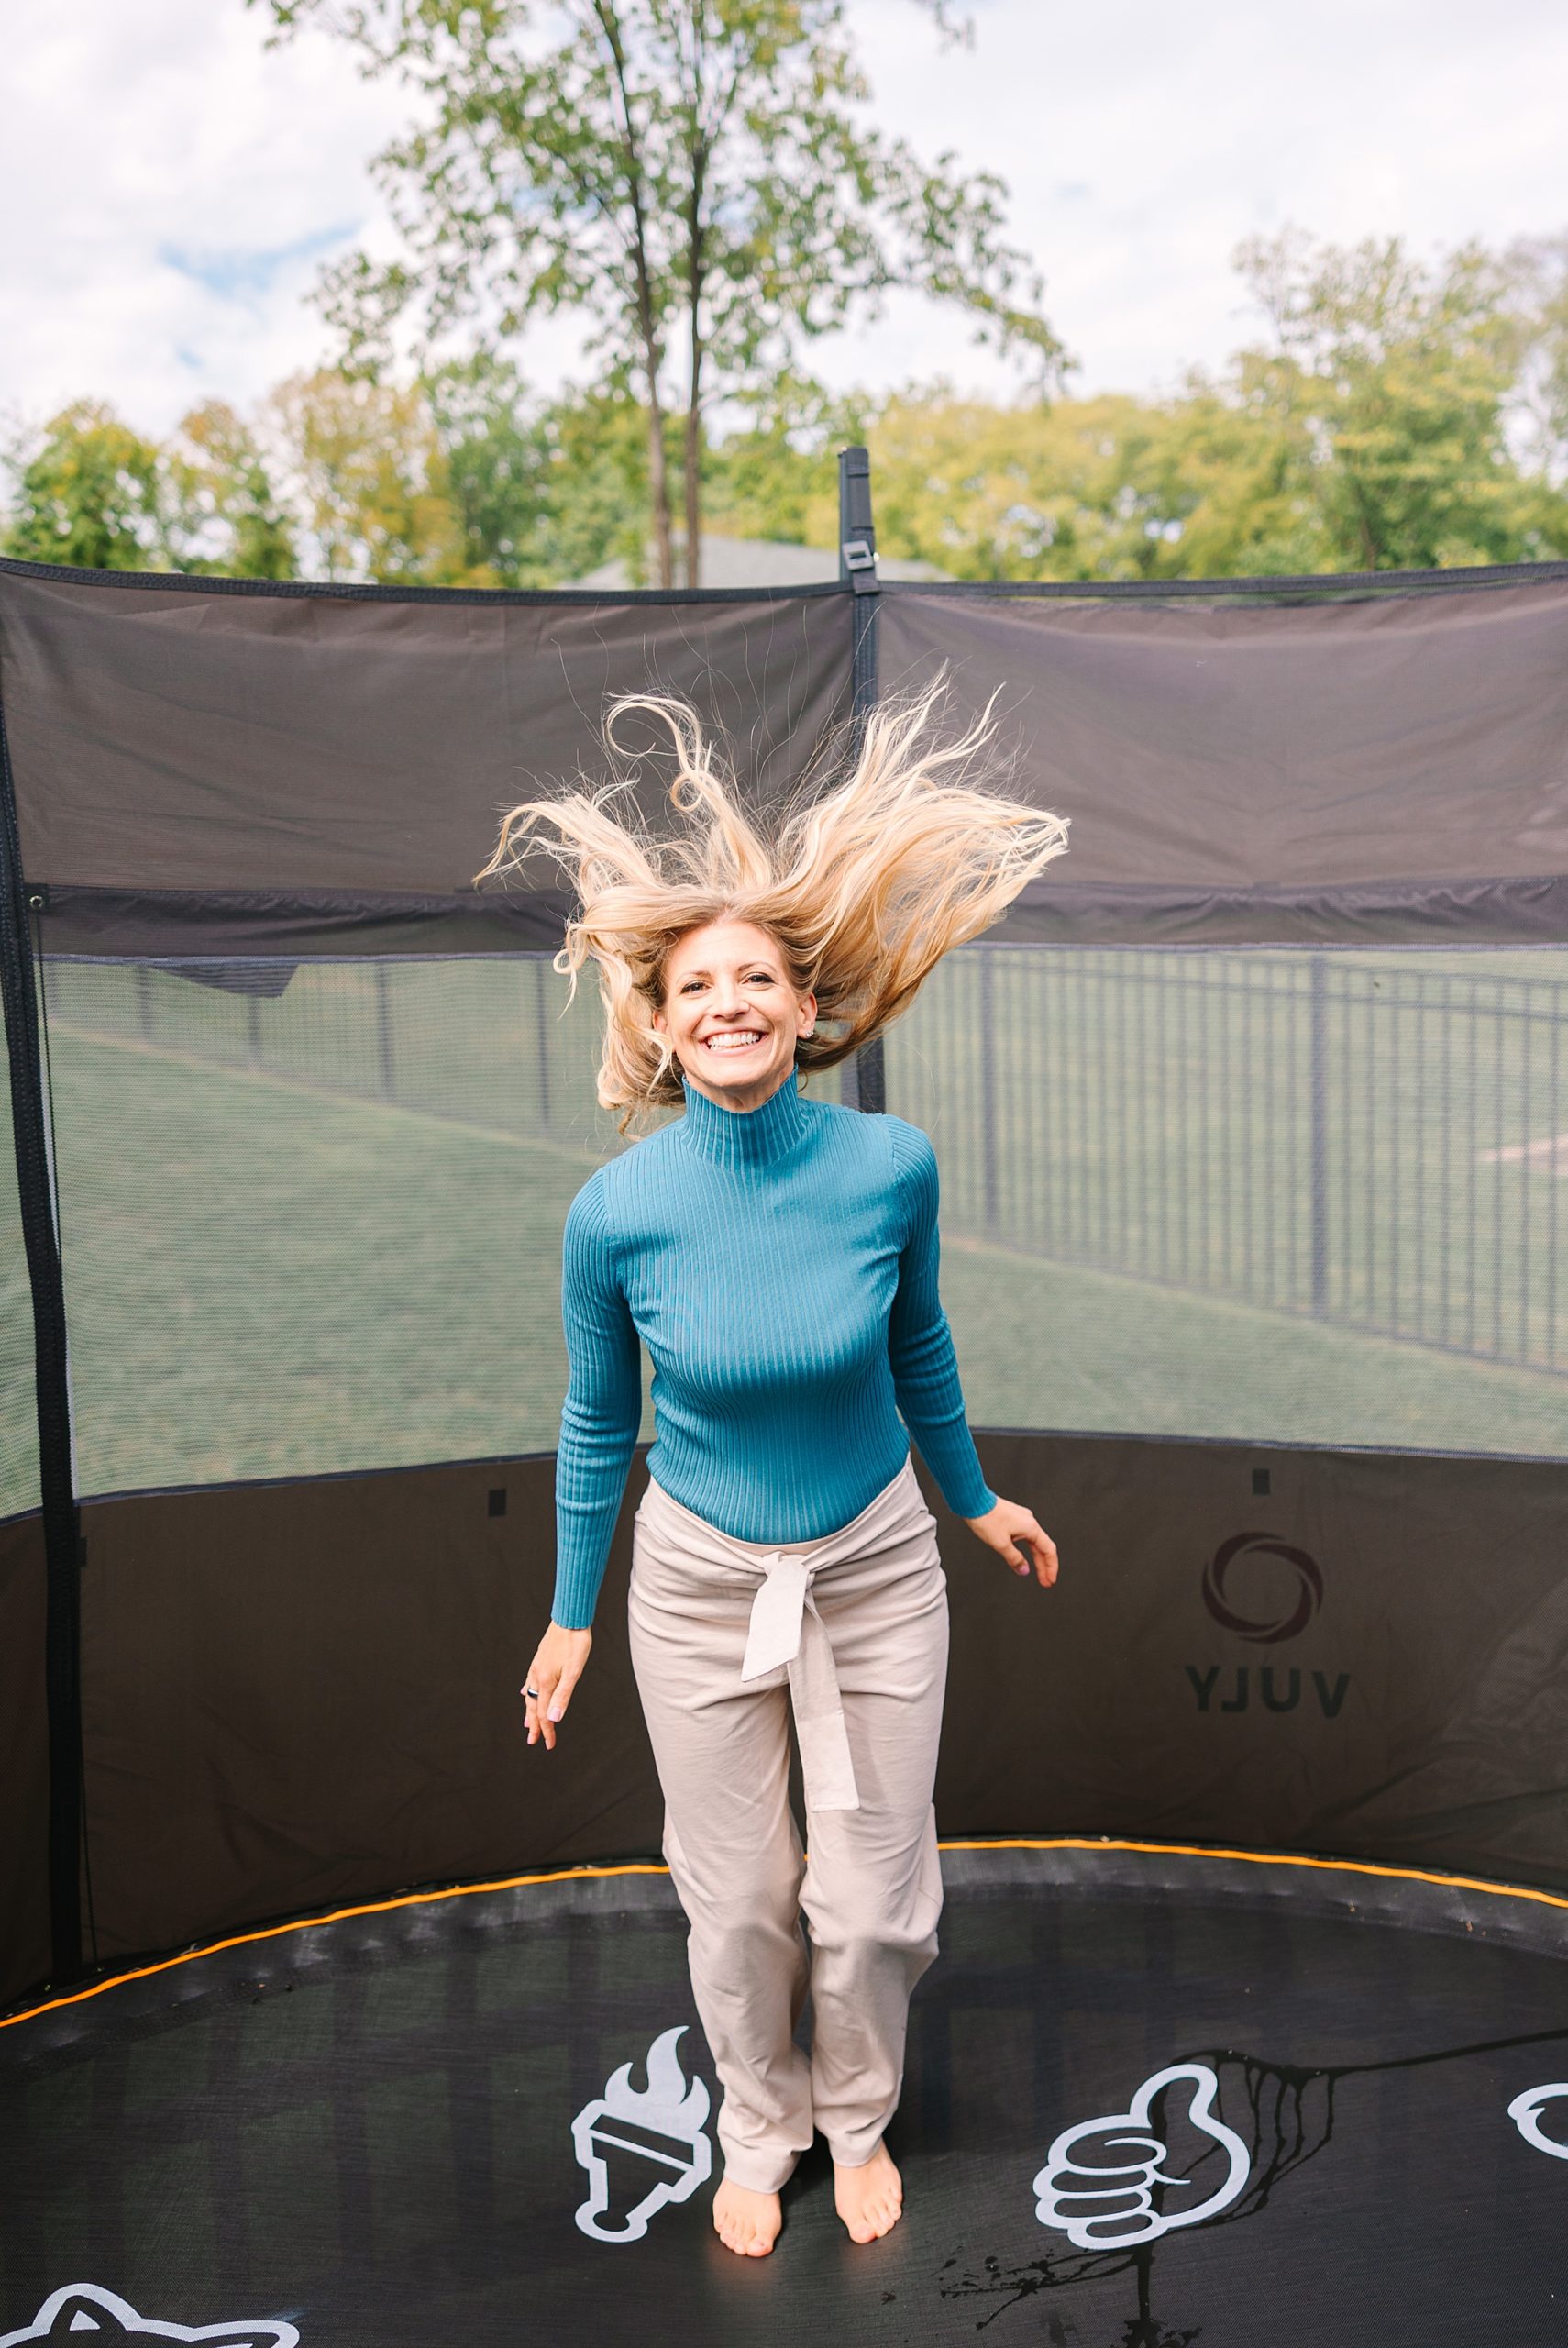 woman jumps on trampoline with blonde hair flying around her